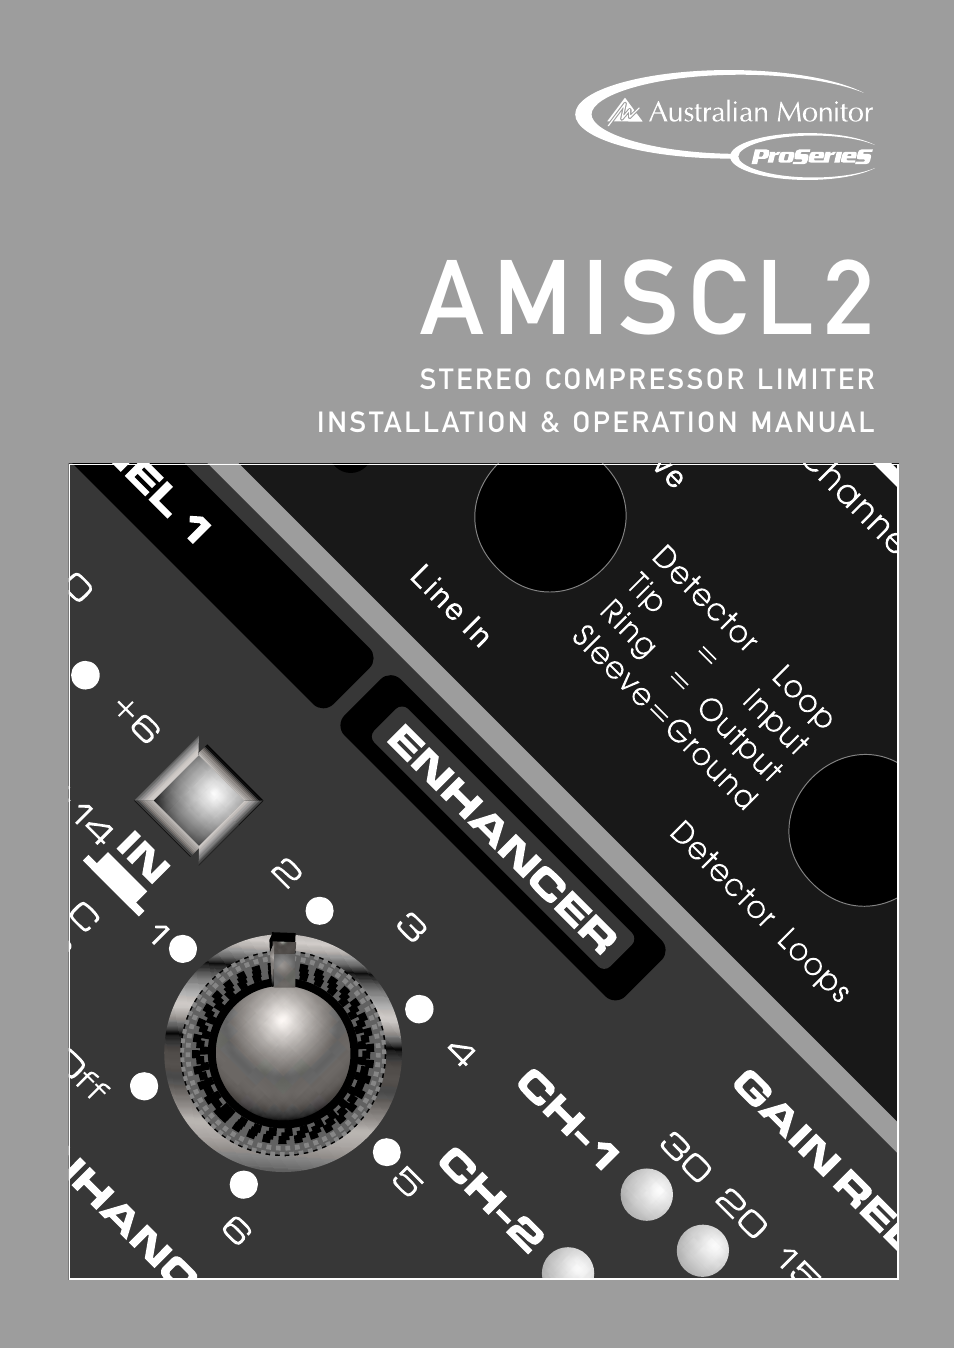 AMISCL2